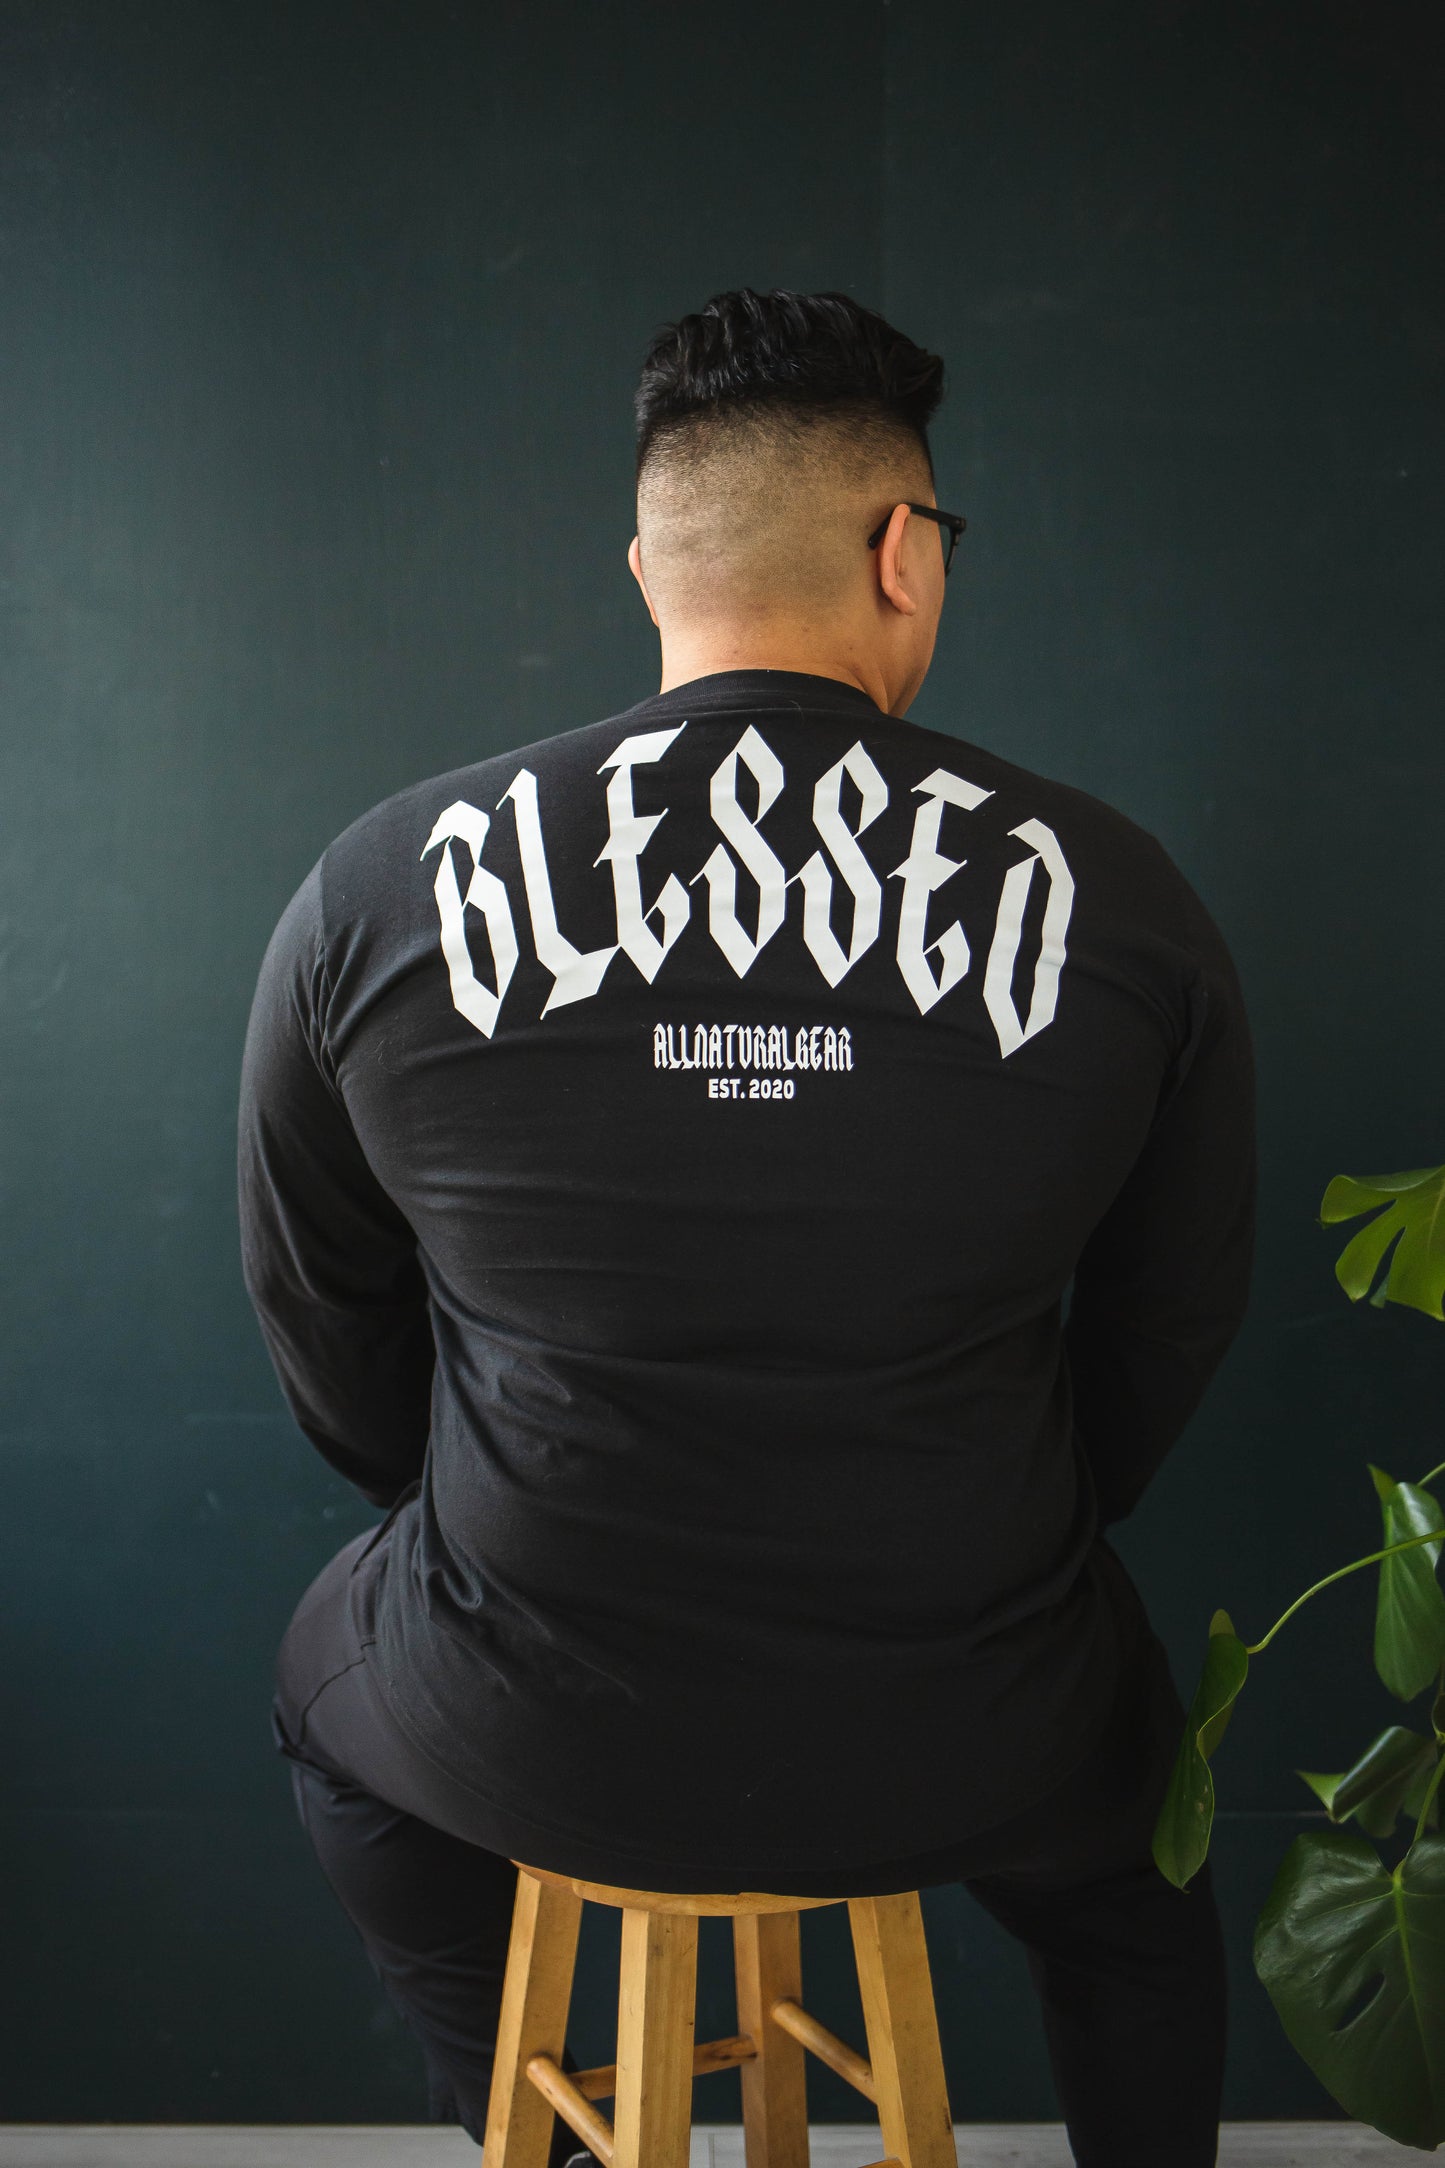 Blessed Long Sleeve